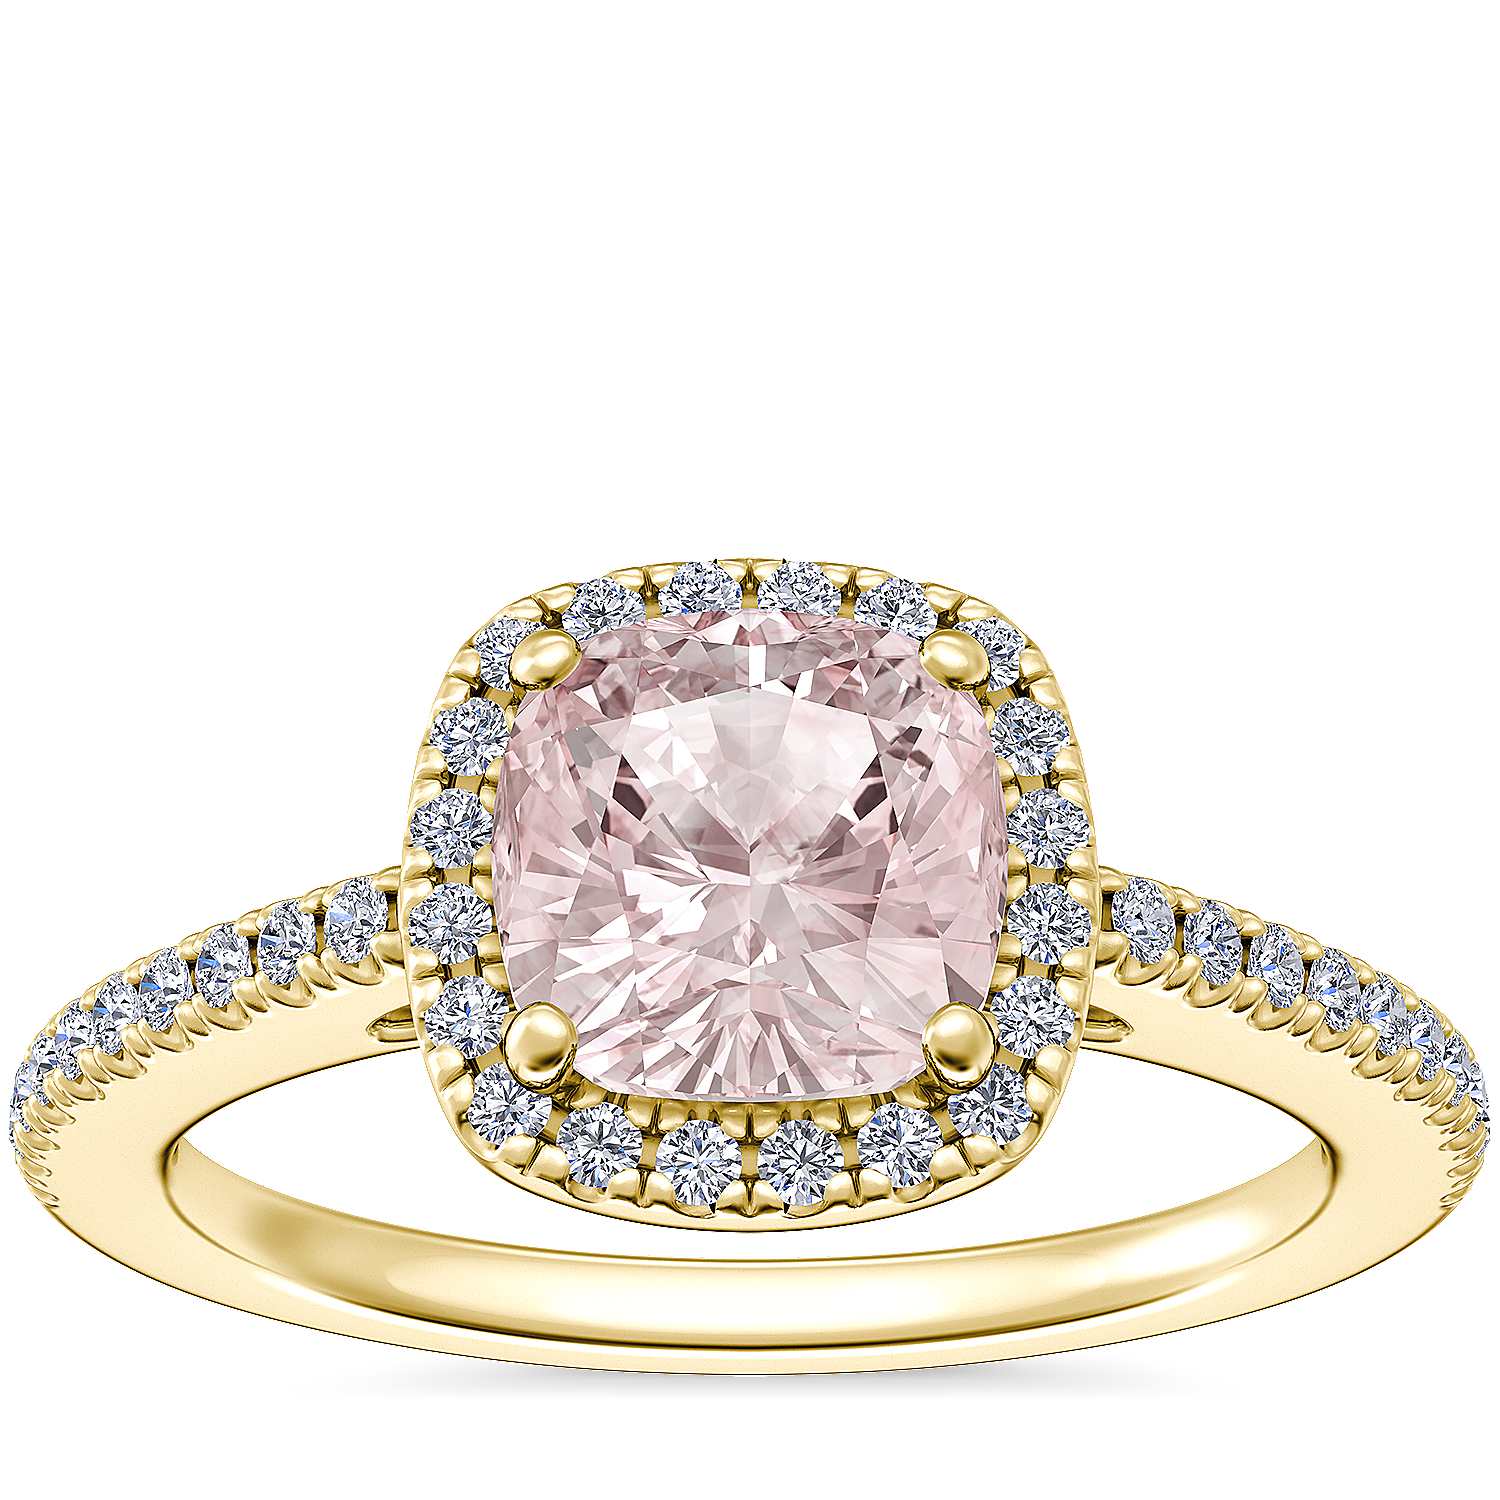 Classic Halo Diamond Engagement Ring with Cushion Morganite in 14k Yellow Gold (6.5mm)